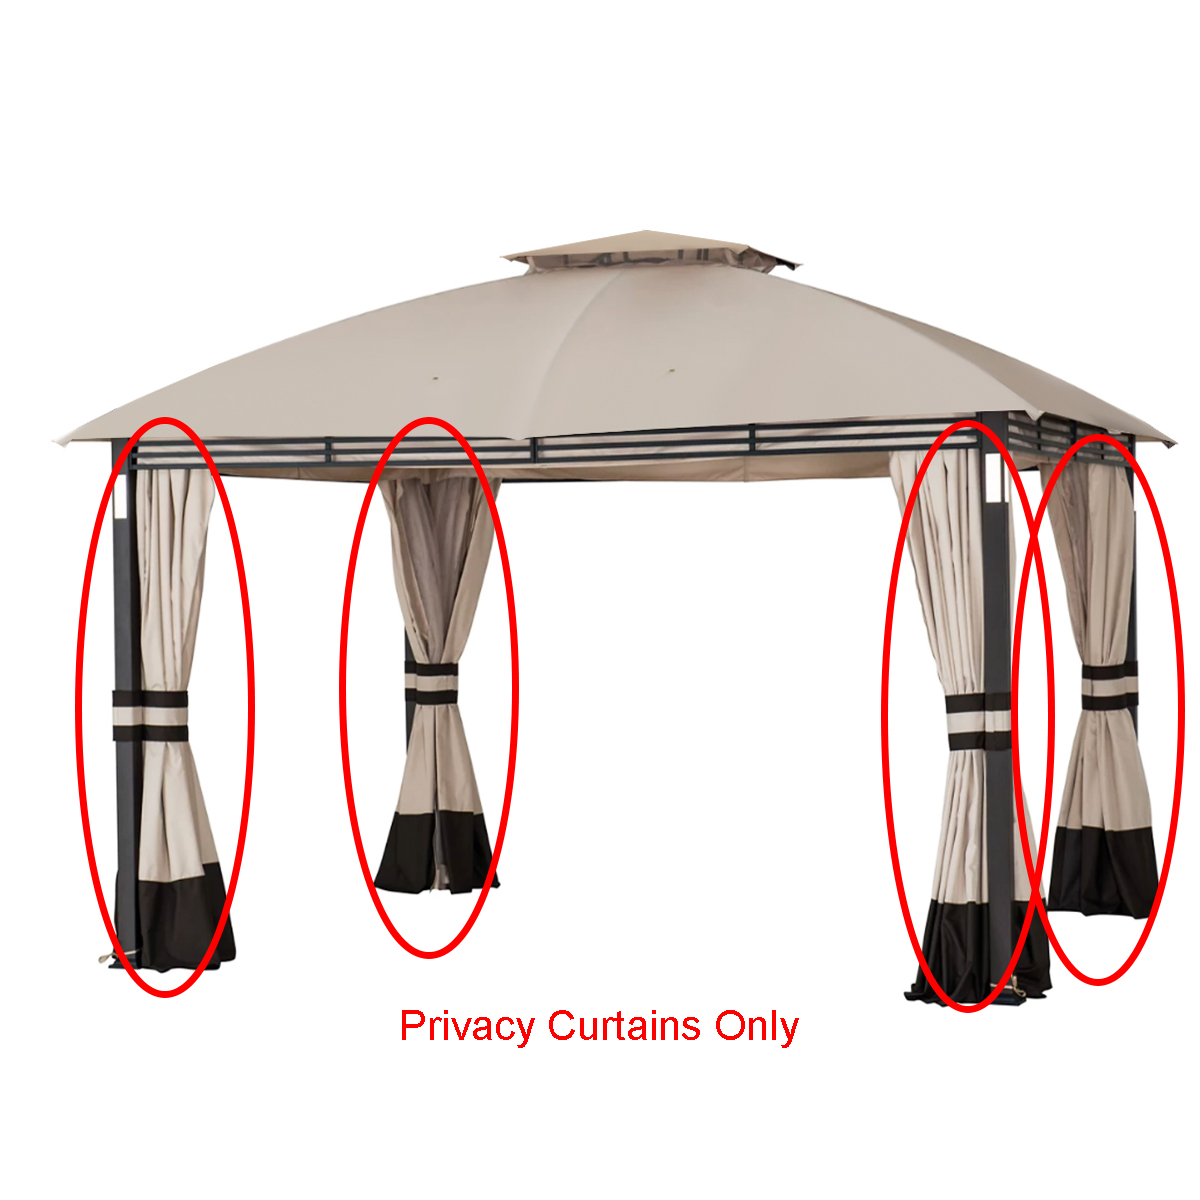 Replacement Privacy Curtain Set for Crestfield 11' X 13' Gazebo